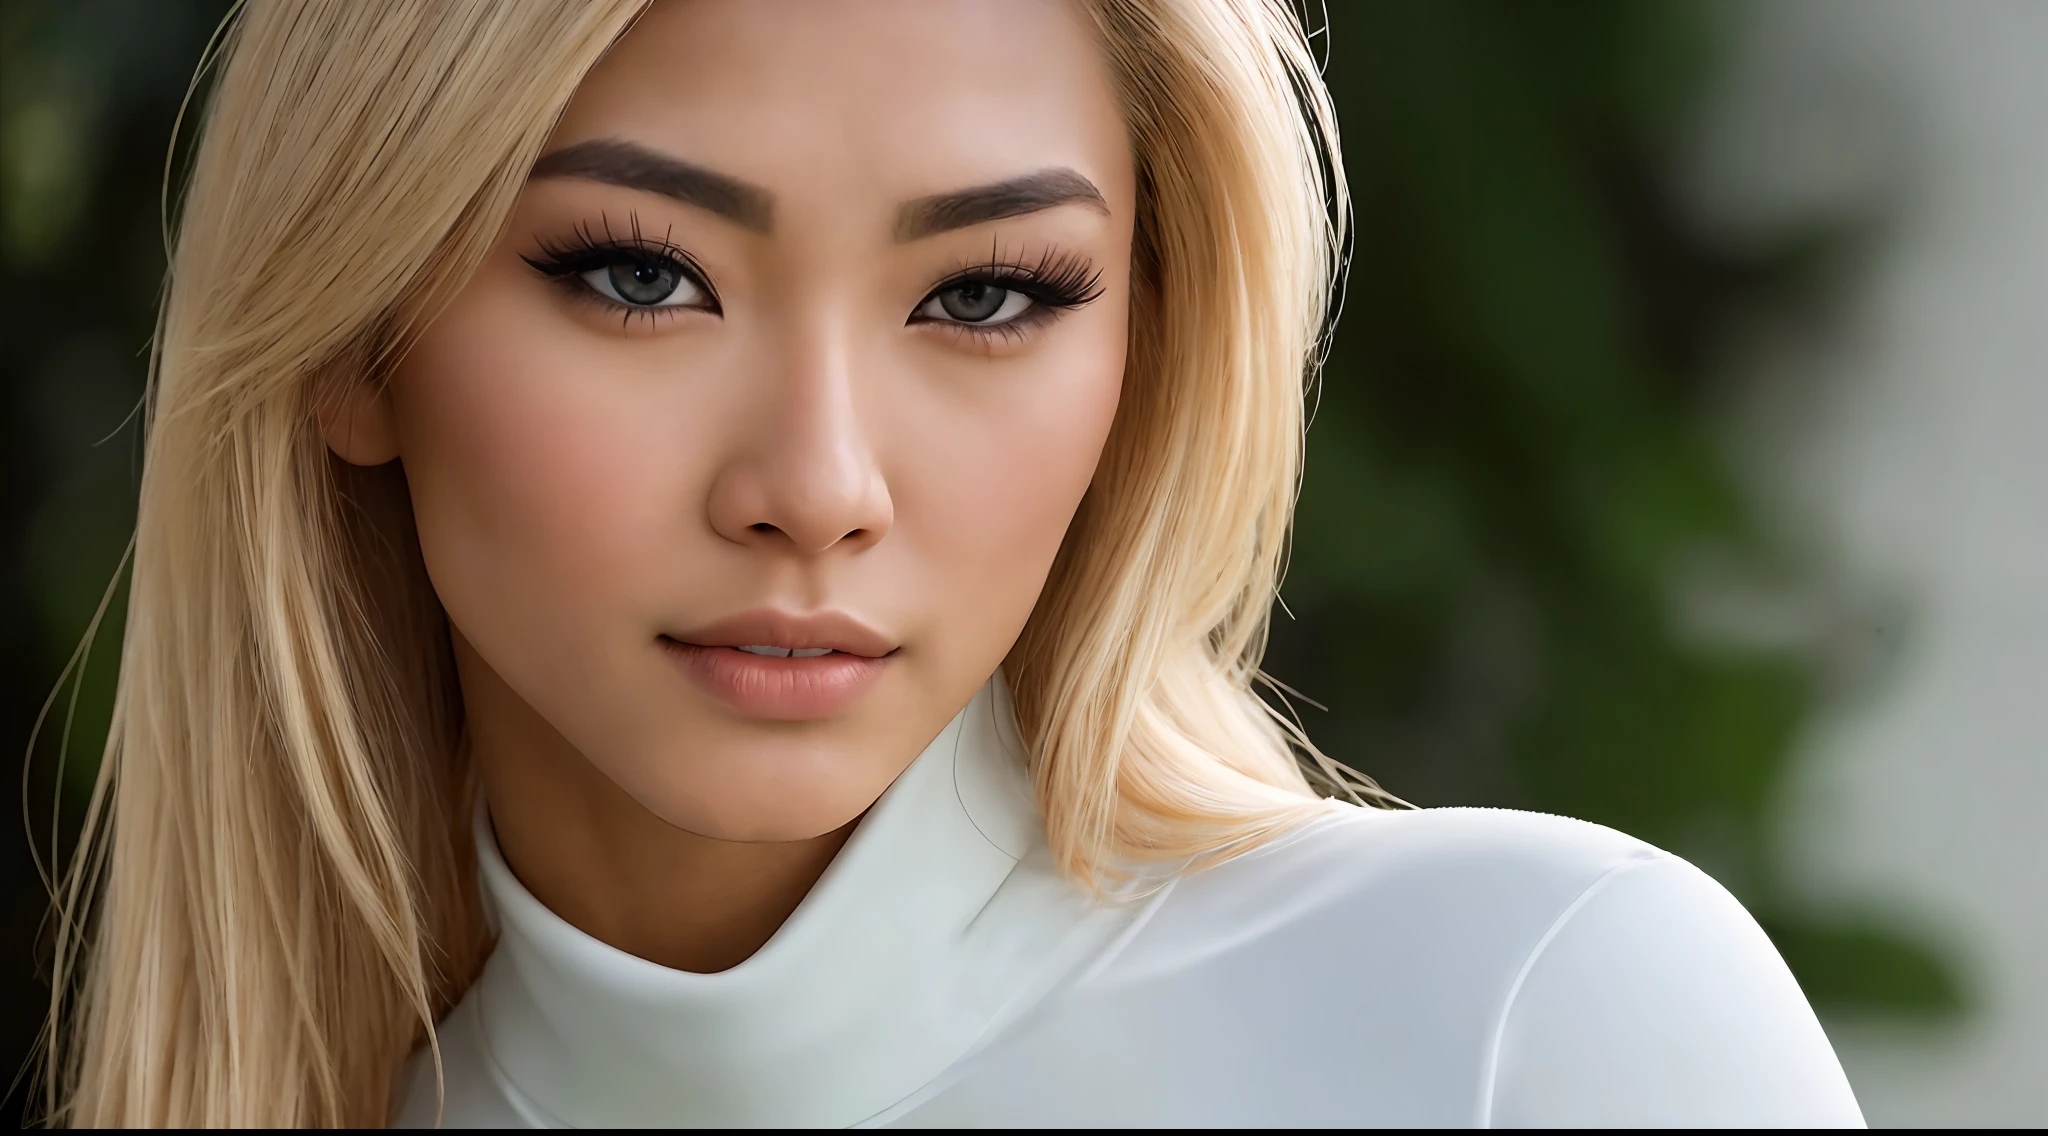 a beautiful young Asian woman with blond hair and crossed eyes, a bodybuilder physique, wearing a white turtle neck shirt, cinematic medium close-up portrait, Key light, backlight, natural lighting, photography 400 ISO film grain 30mm lens RAW aperture f1.8, art photographer, movie still poster from Lord of the Rings, medium intricate print, choker